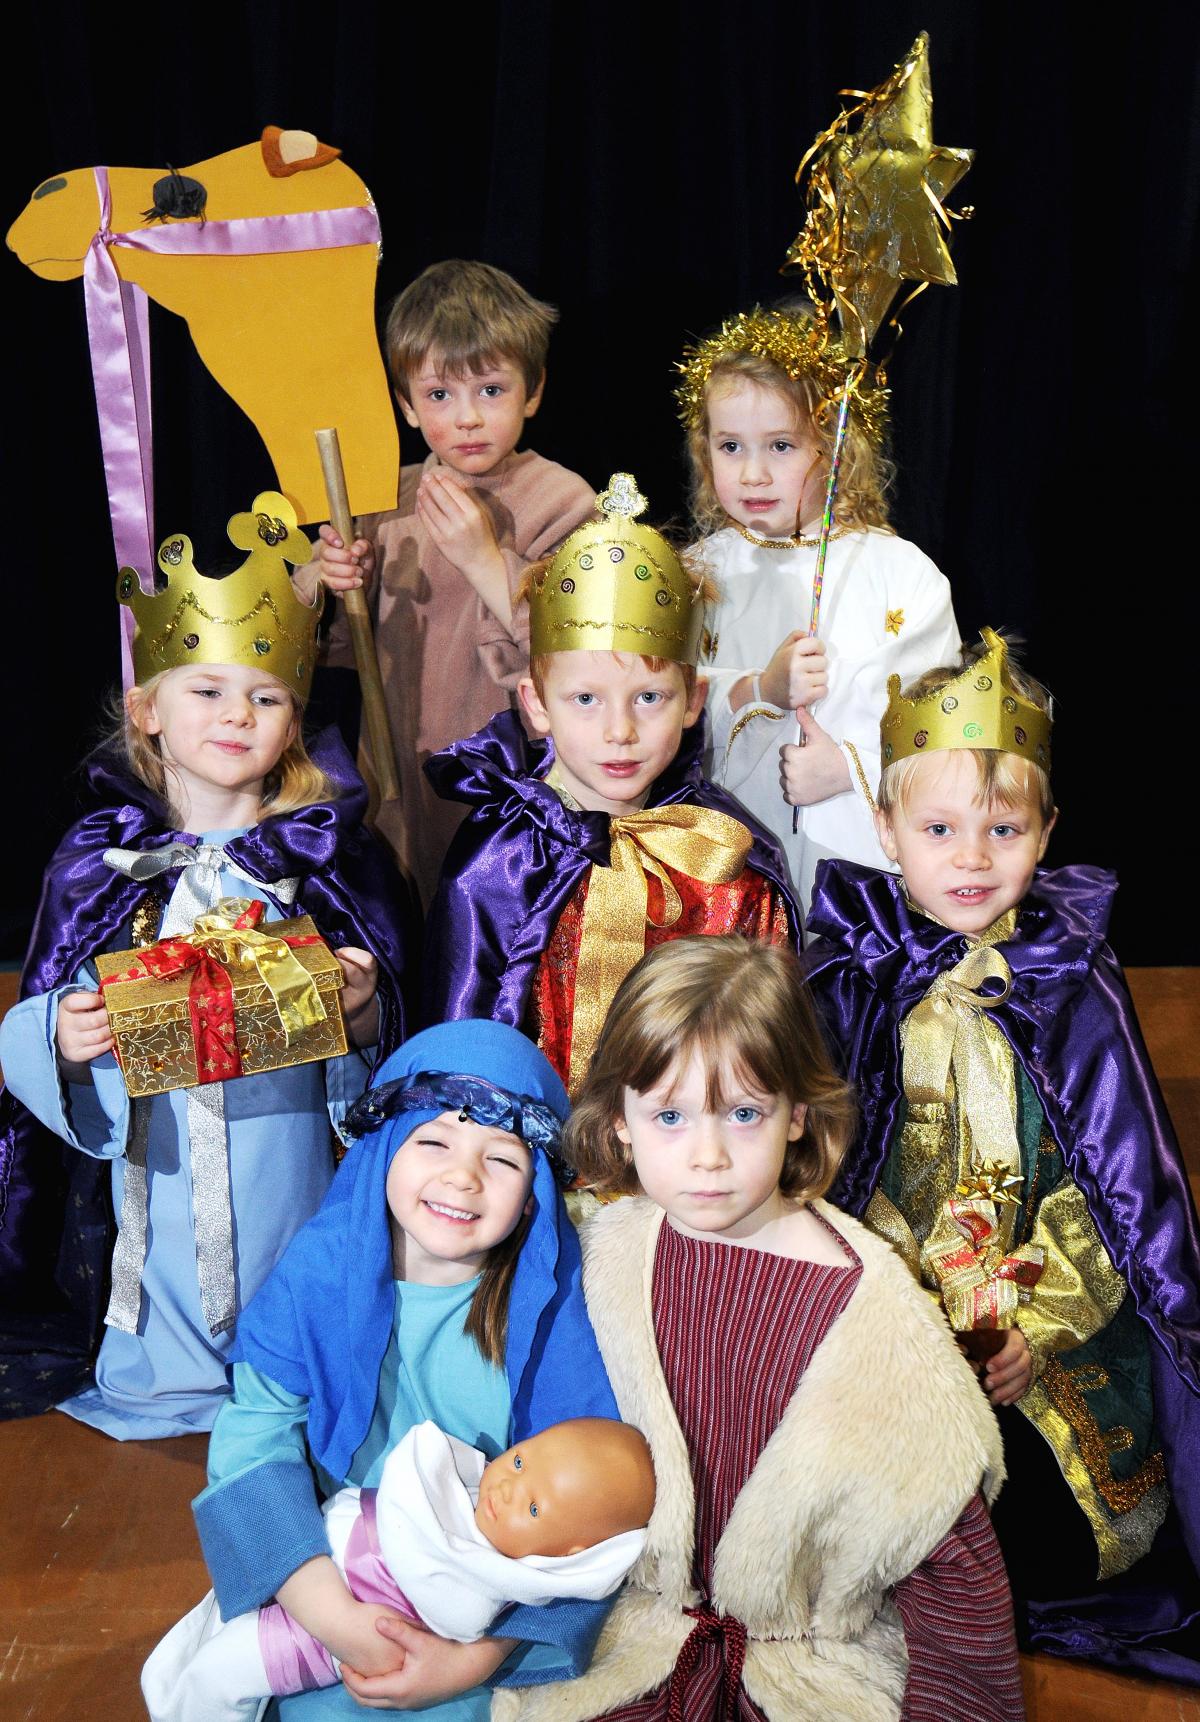 From the left, back, Sophie Smeaton, Alexander Clarke, Charlie Voss, Oliver watson, front, Anna Joyce and Olivia Cann